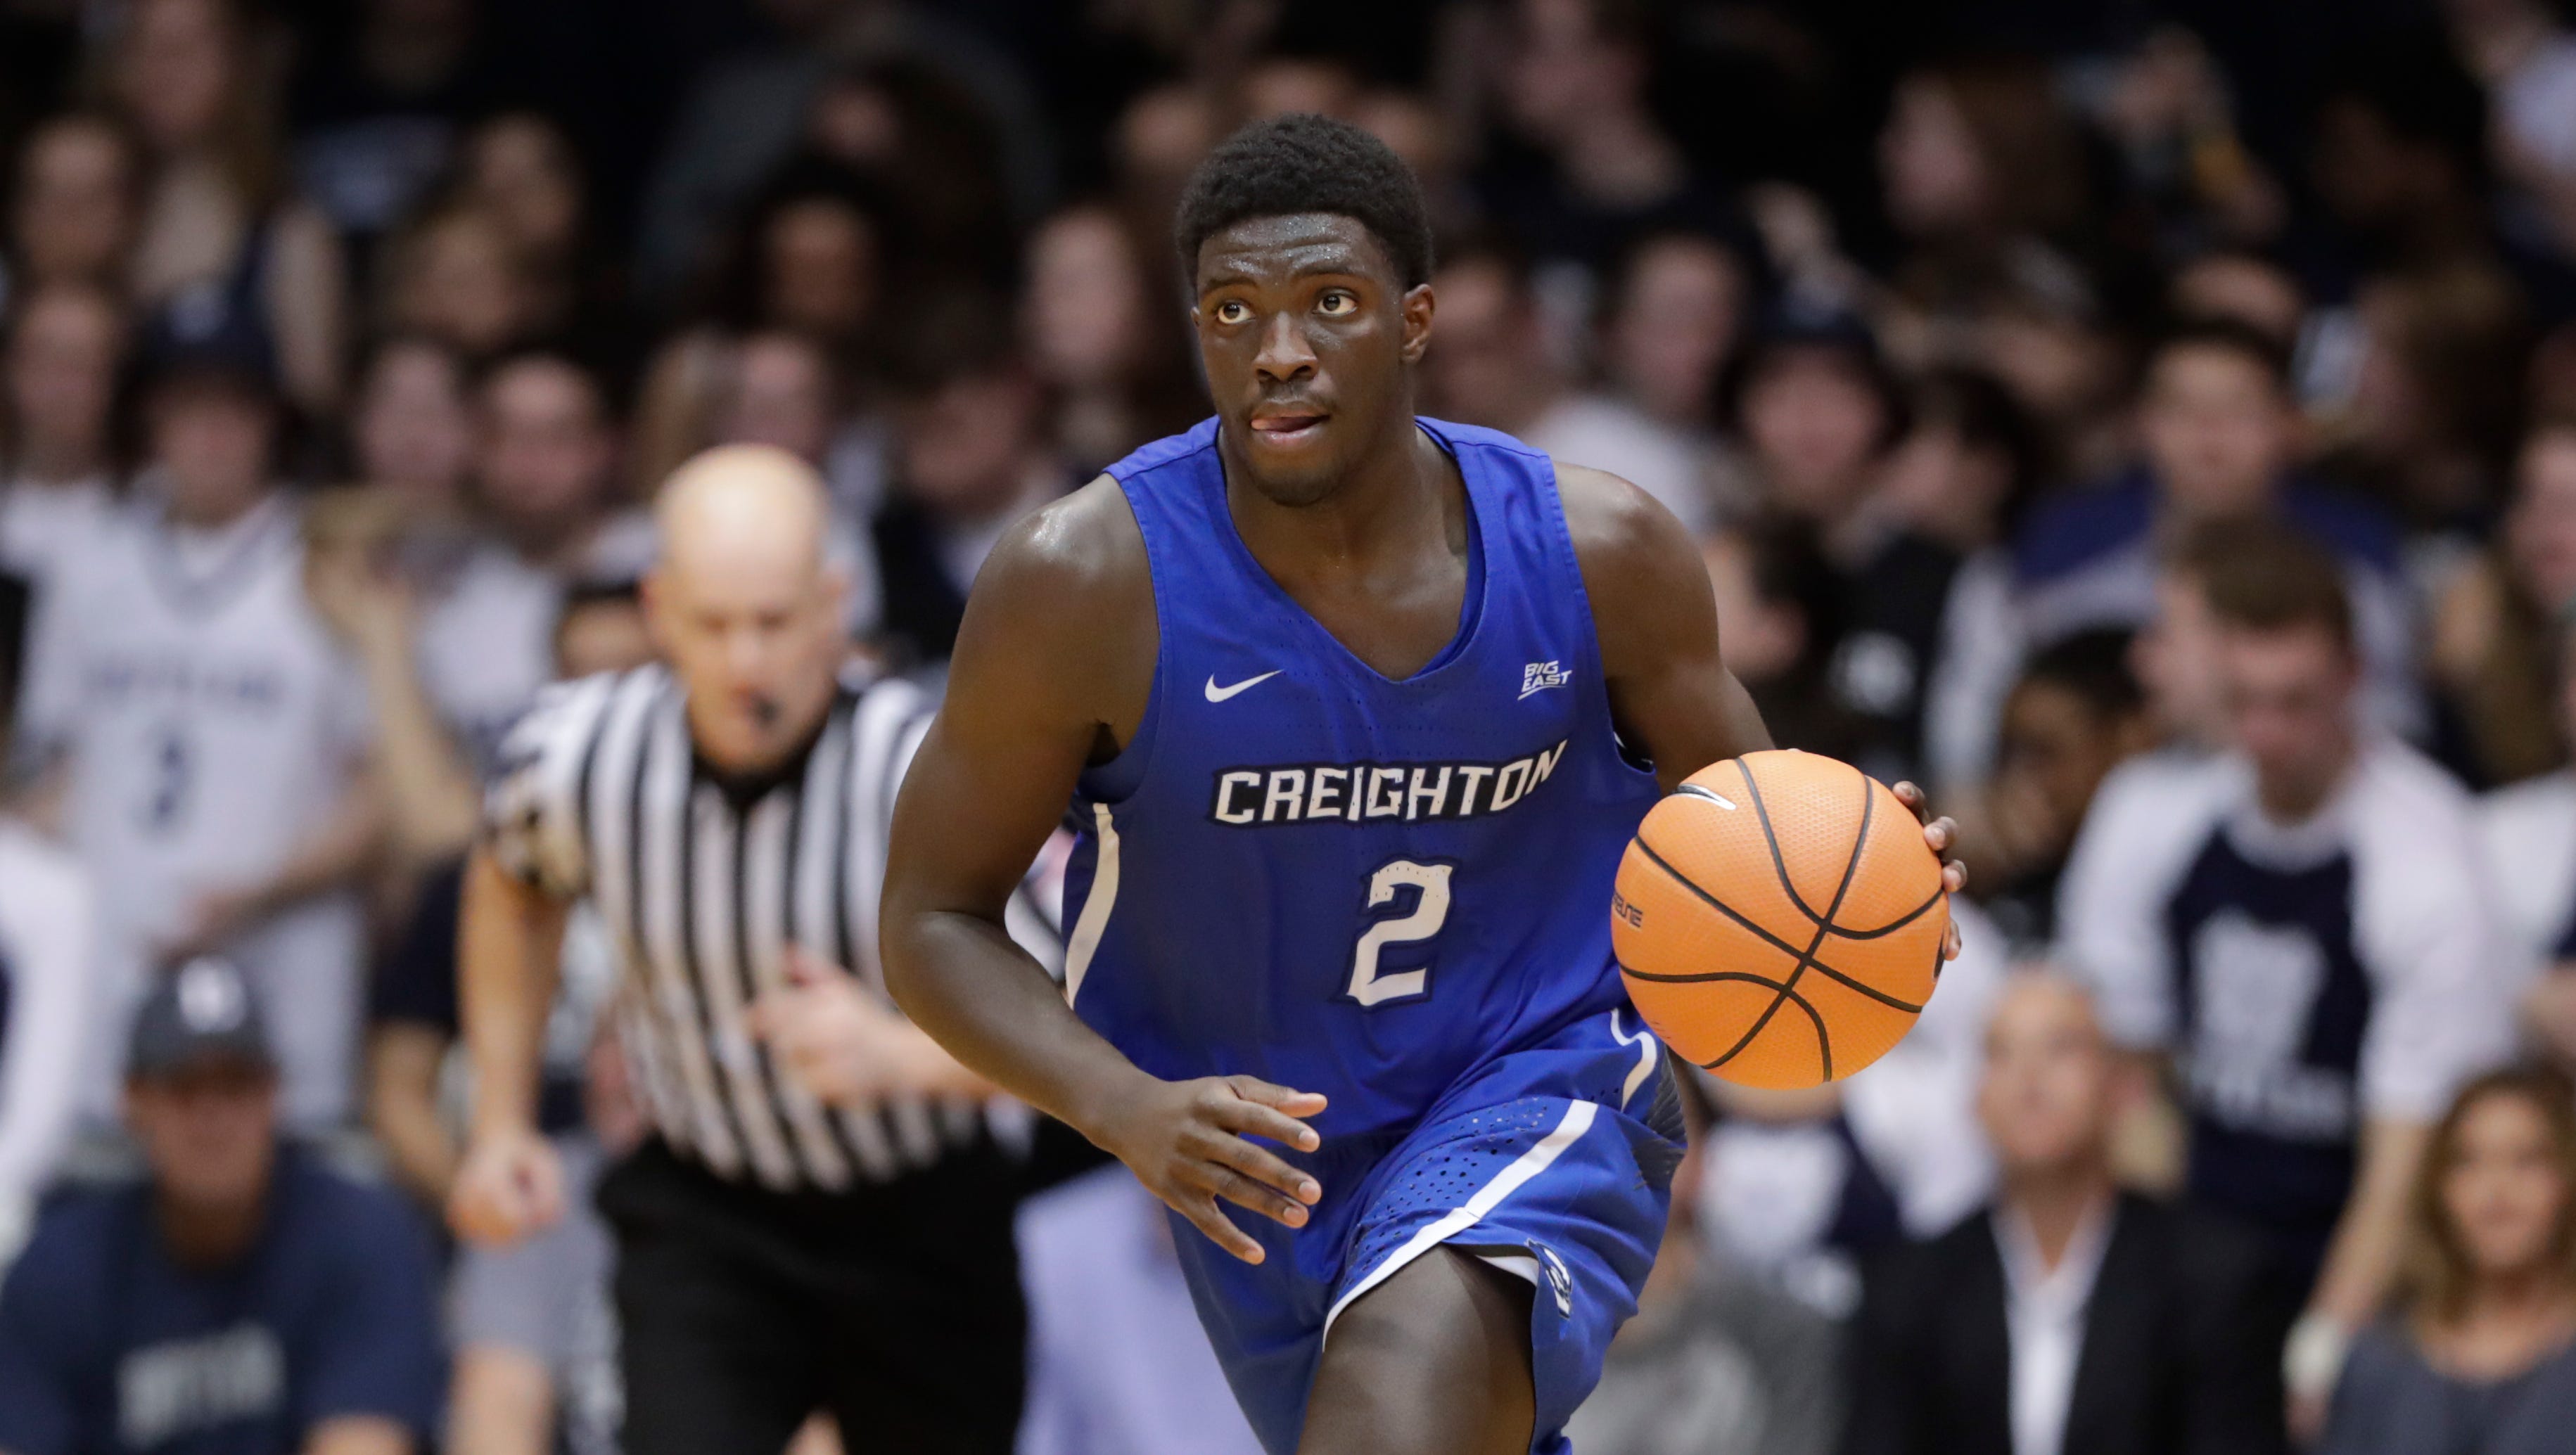 18. San Antonio Spurs: Khyri Thomas, SG, Jr. Creighton. The Spurs need to groom the next guard to succeed Manu Ginobili and likely will go for Thomas or Troy Brown. They opt for Thomas’ maturity, with three years at Creighton, over Brown’s size, at 6-7, but Thomas' 6-10½ wingspan can make up for some of the difference on the defensive end.